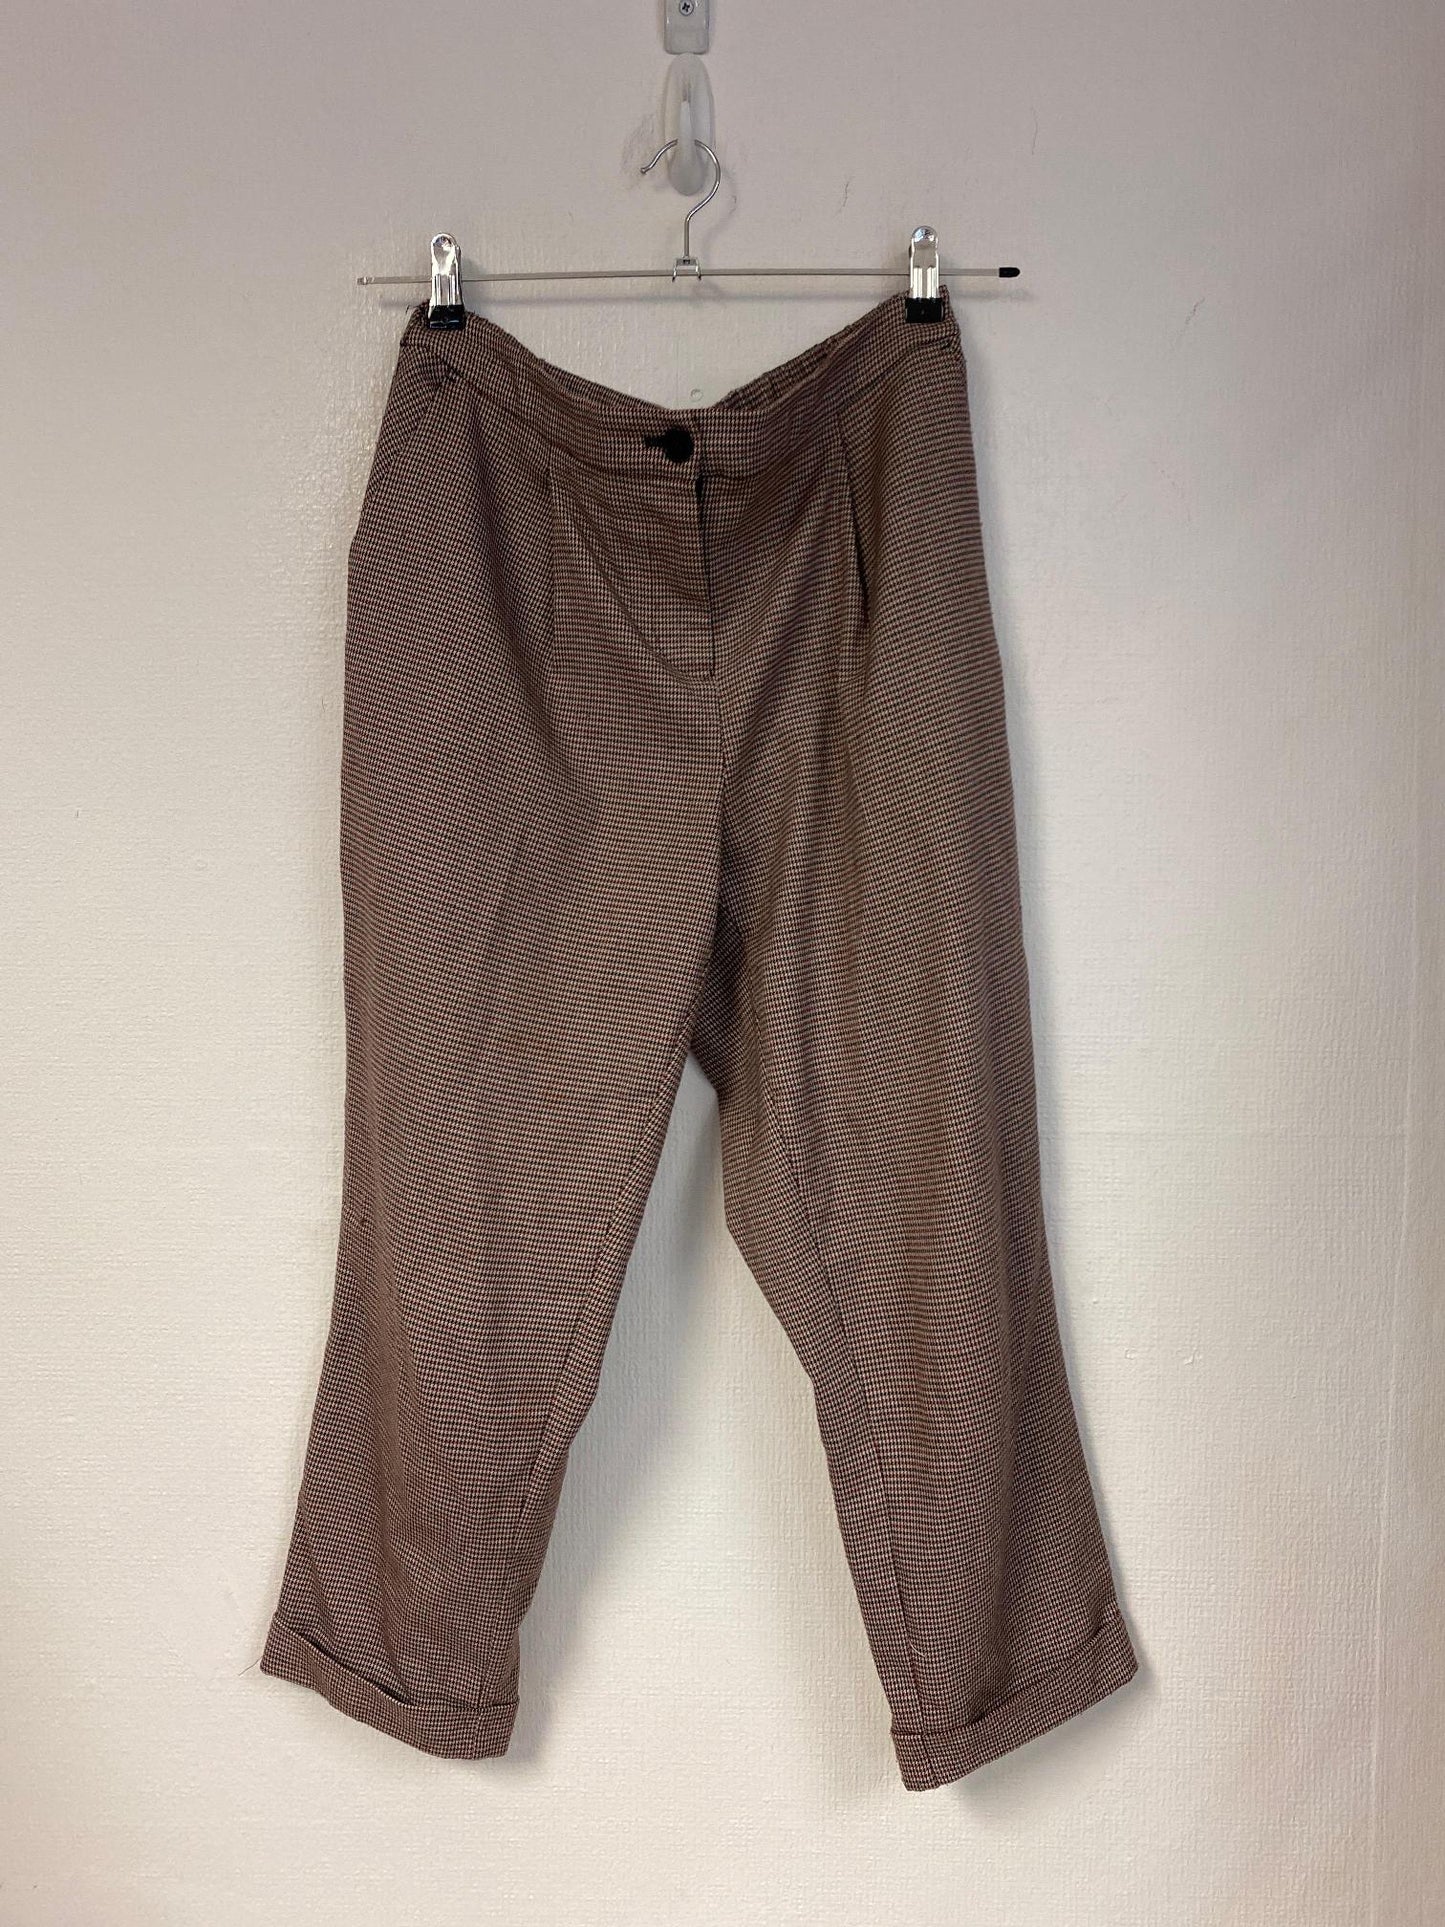 Khaki and red tailored cropped trousers, Next, size 10 - Damaged Item Sale